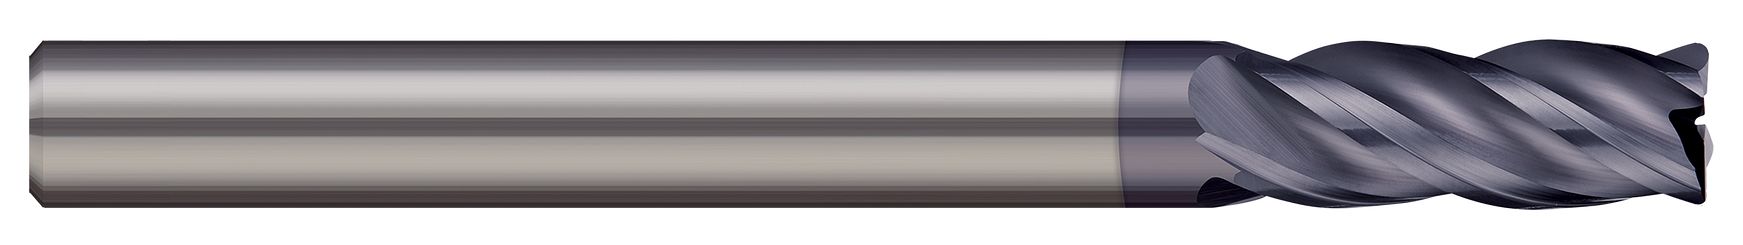 End Mills for Steels & High Temperature Alloys-Corner Radius-4 Flute-Variable Helix